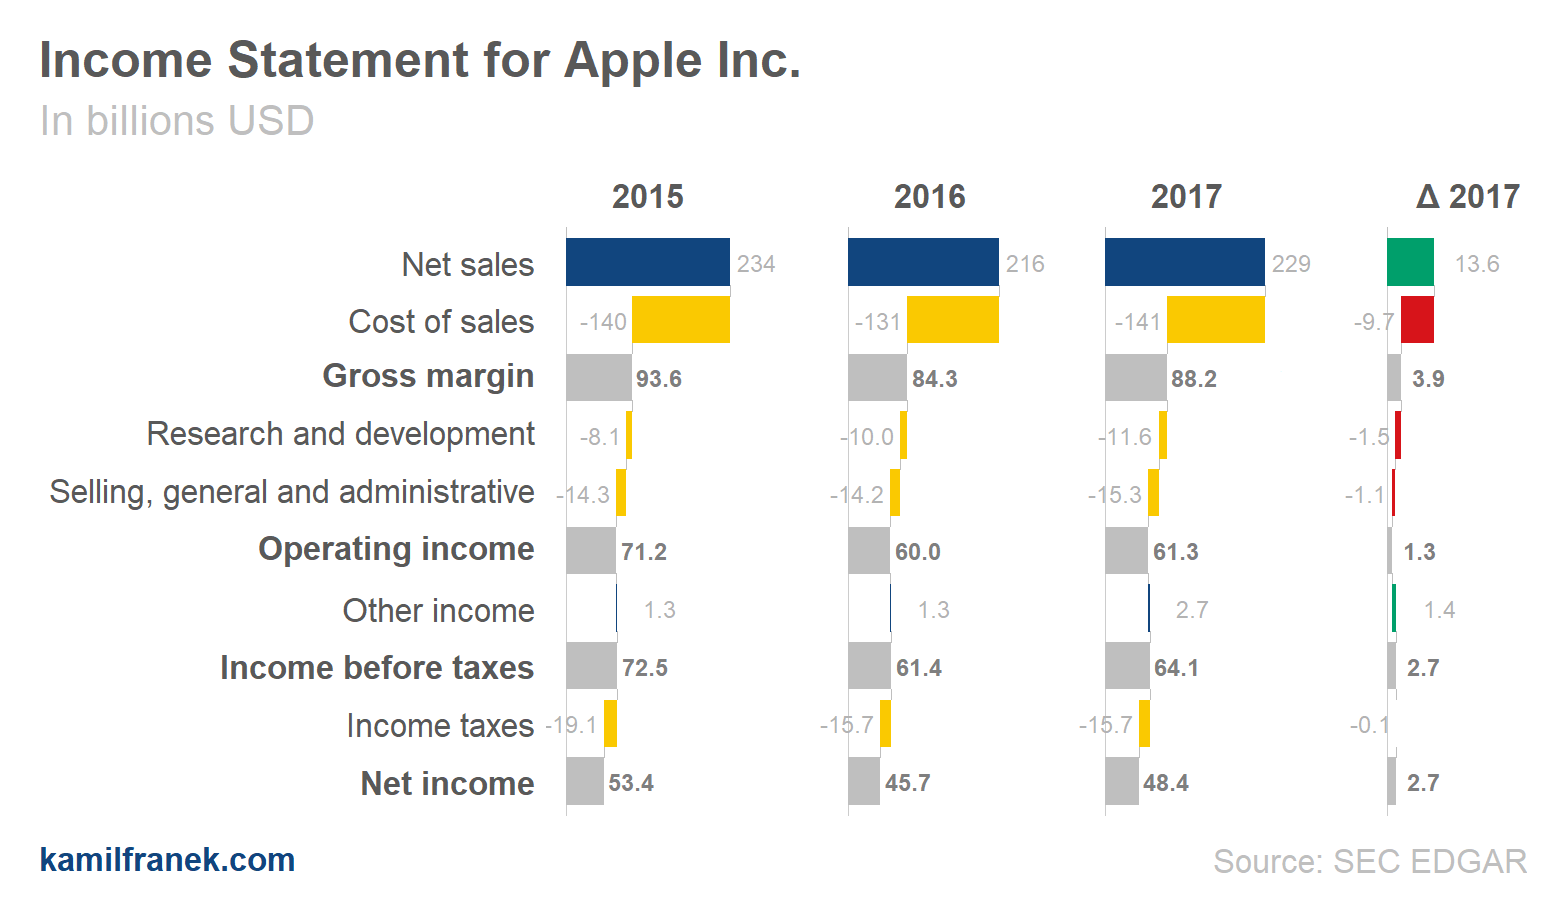 Waterfall Income Statement Visualization for Apple Inc.